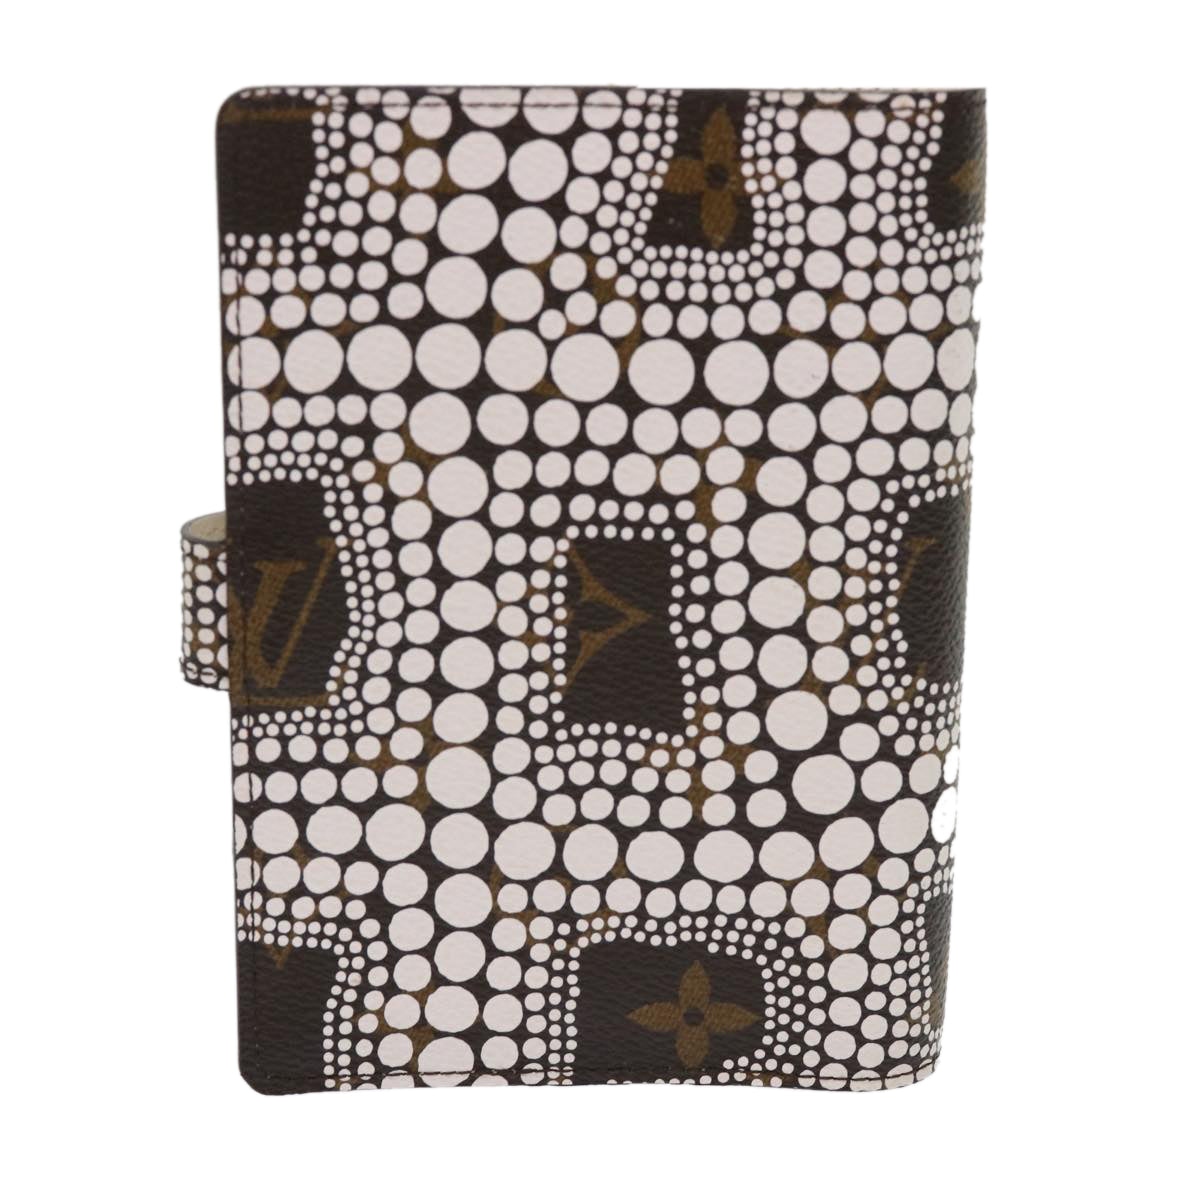 LOUIS VUITTON Yayoi Kusama Agenda PM Day Planner Cover White R21131 Auth 47200A - 0